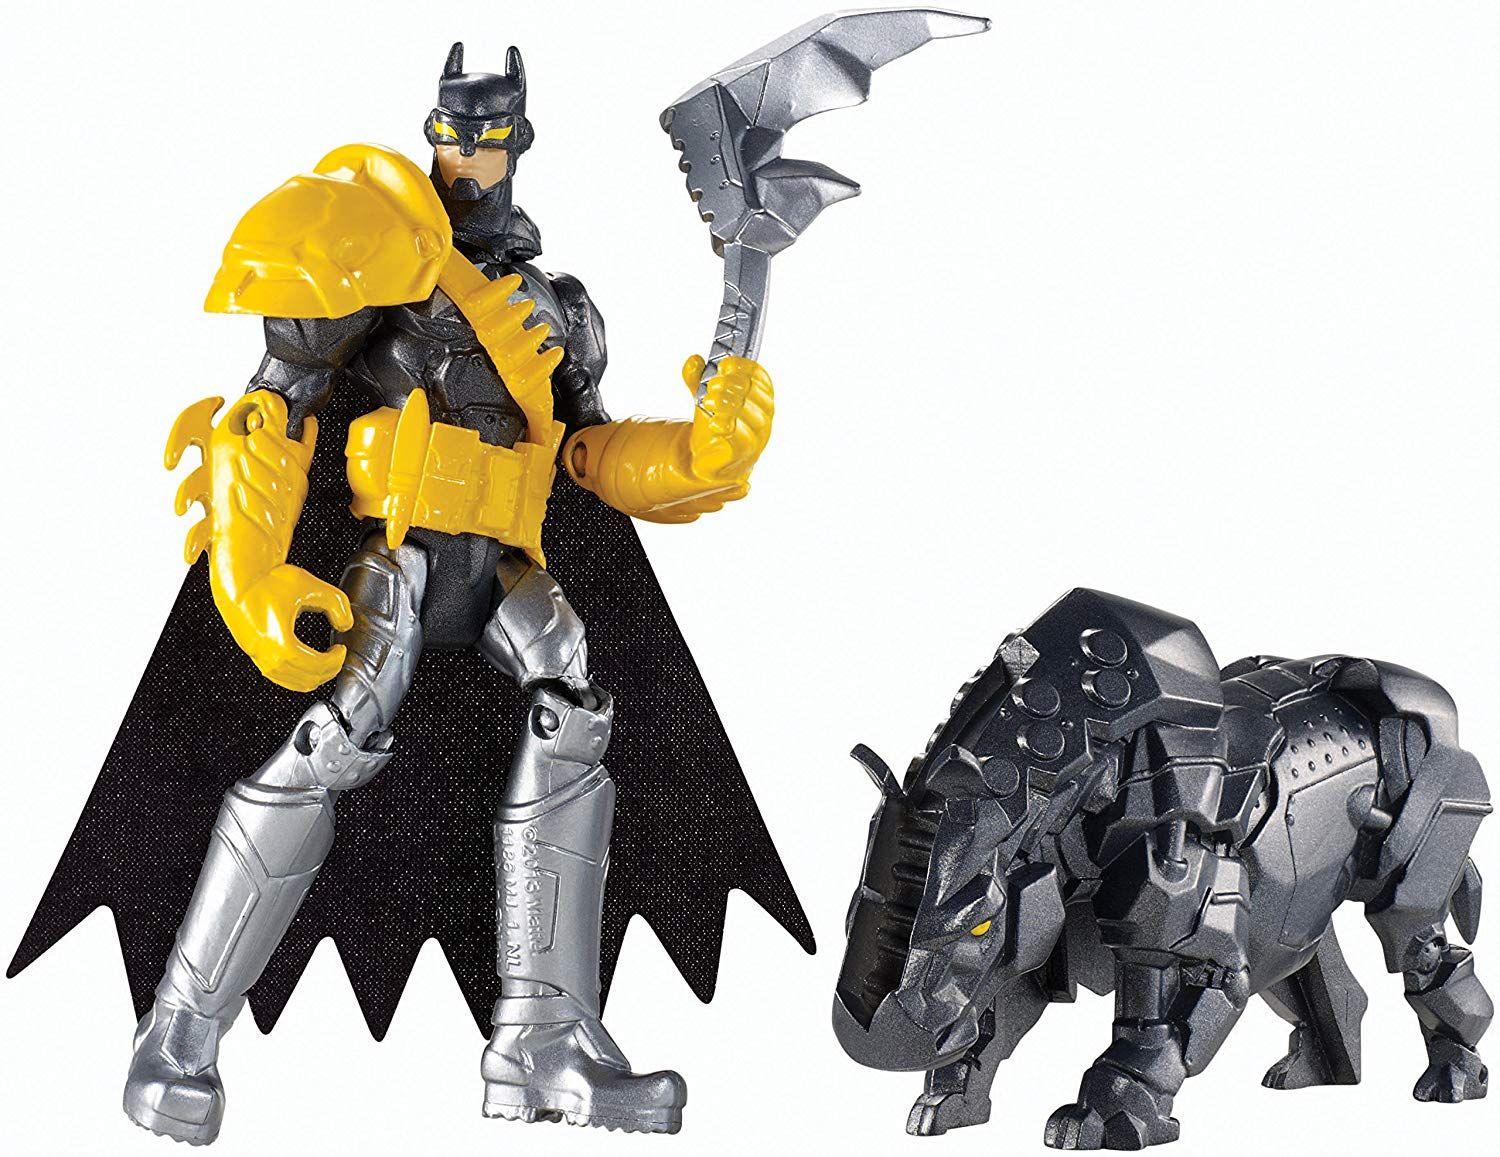 The Most Ridiculous Batman Toy Armor EVER